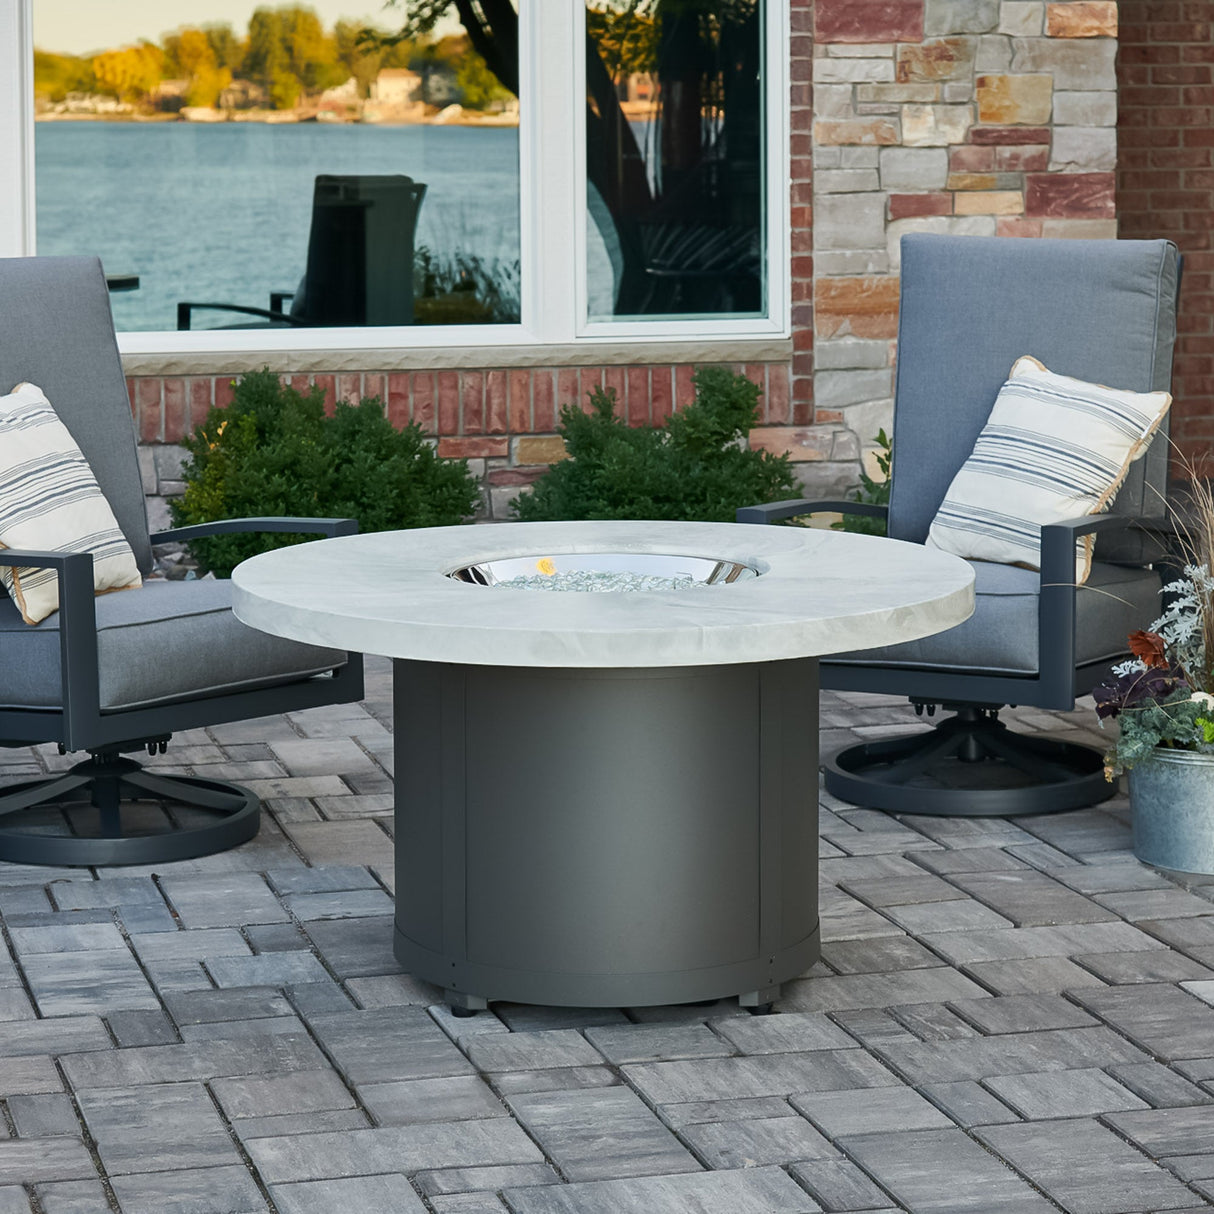 The White Onyx Beacon Round Gas Fire Pit Table with its cover off next to patio furniture outside